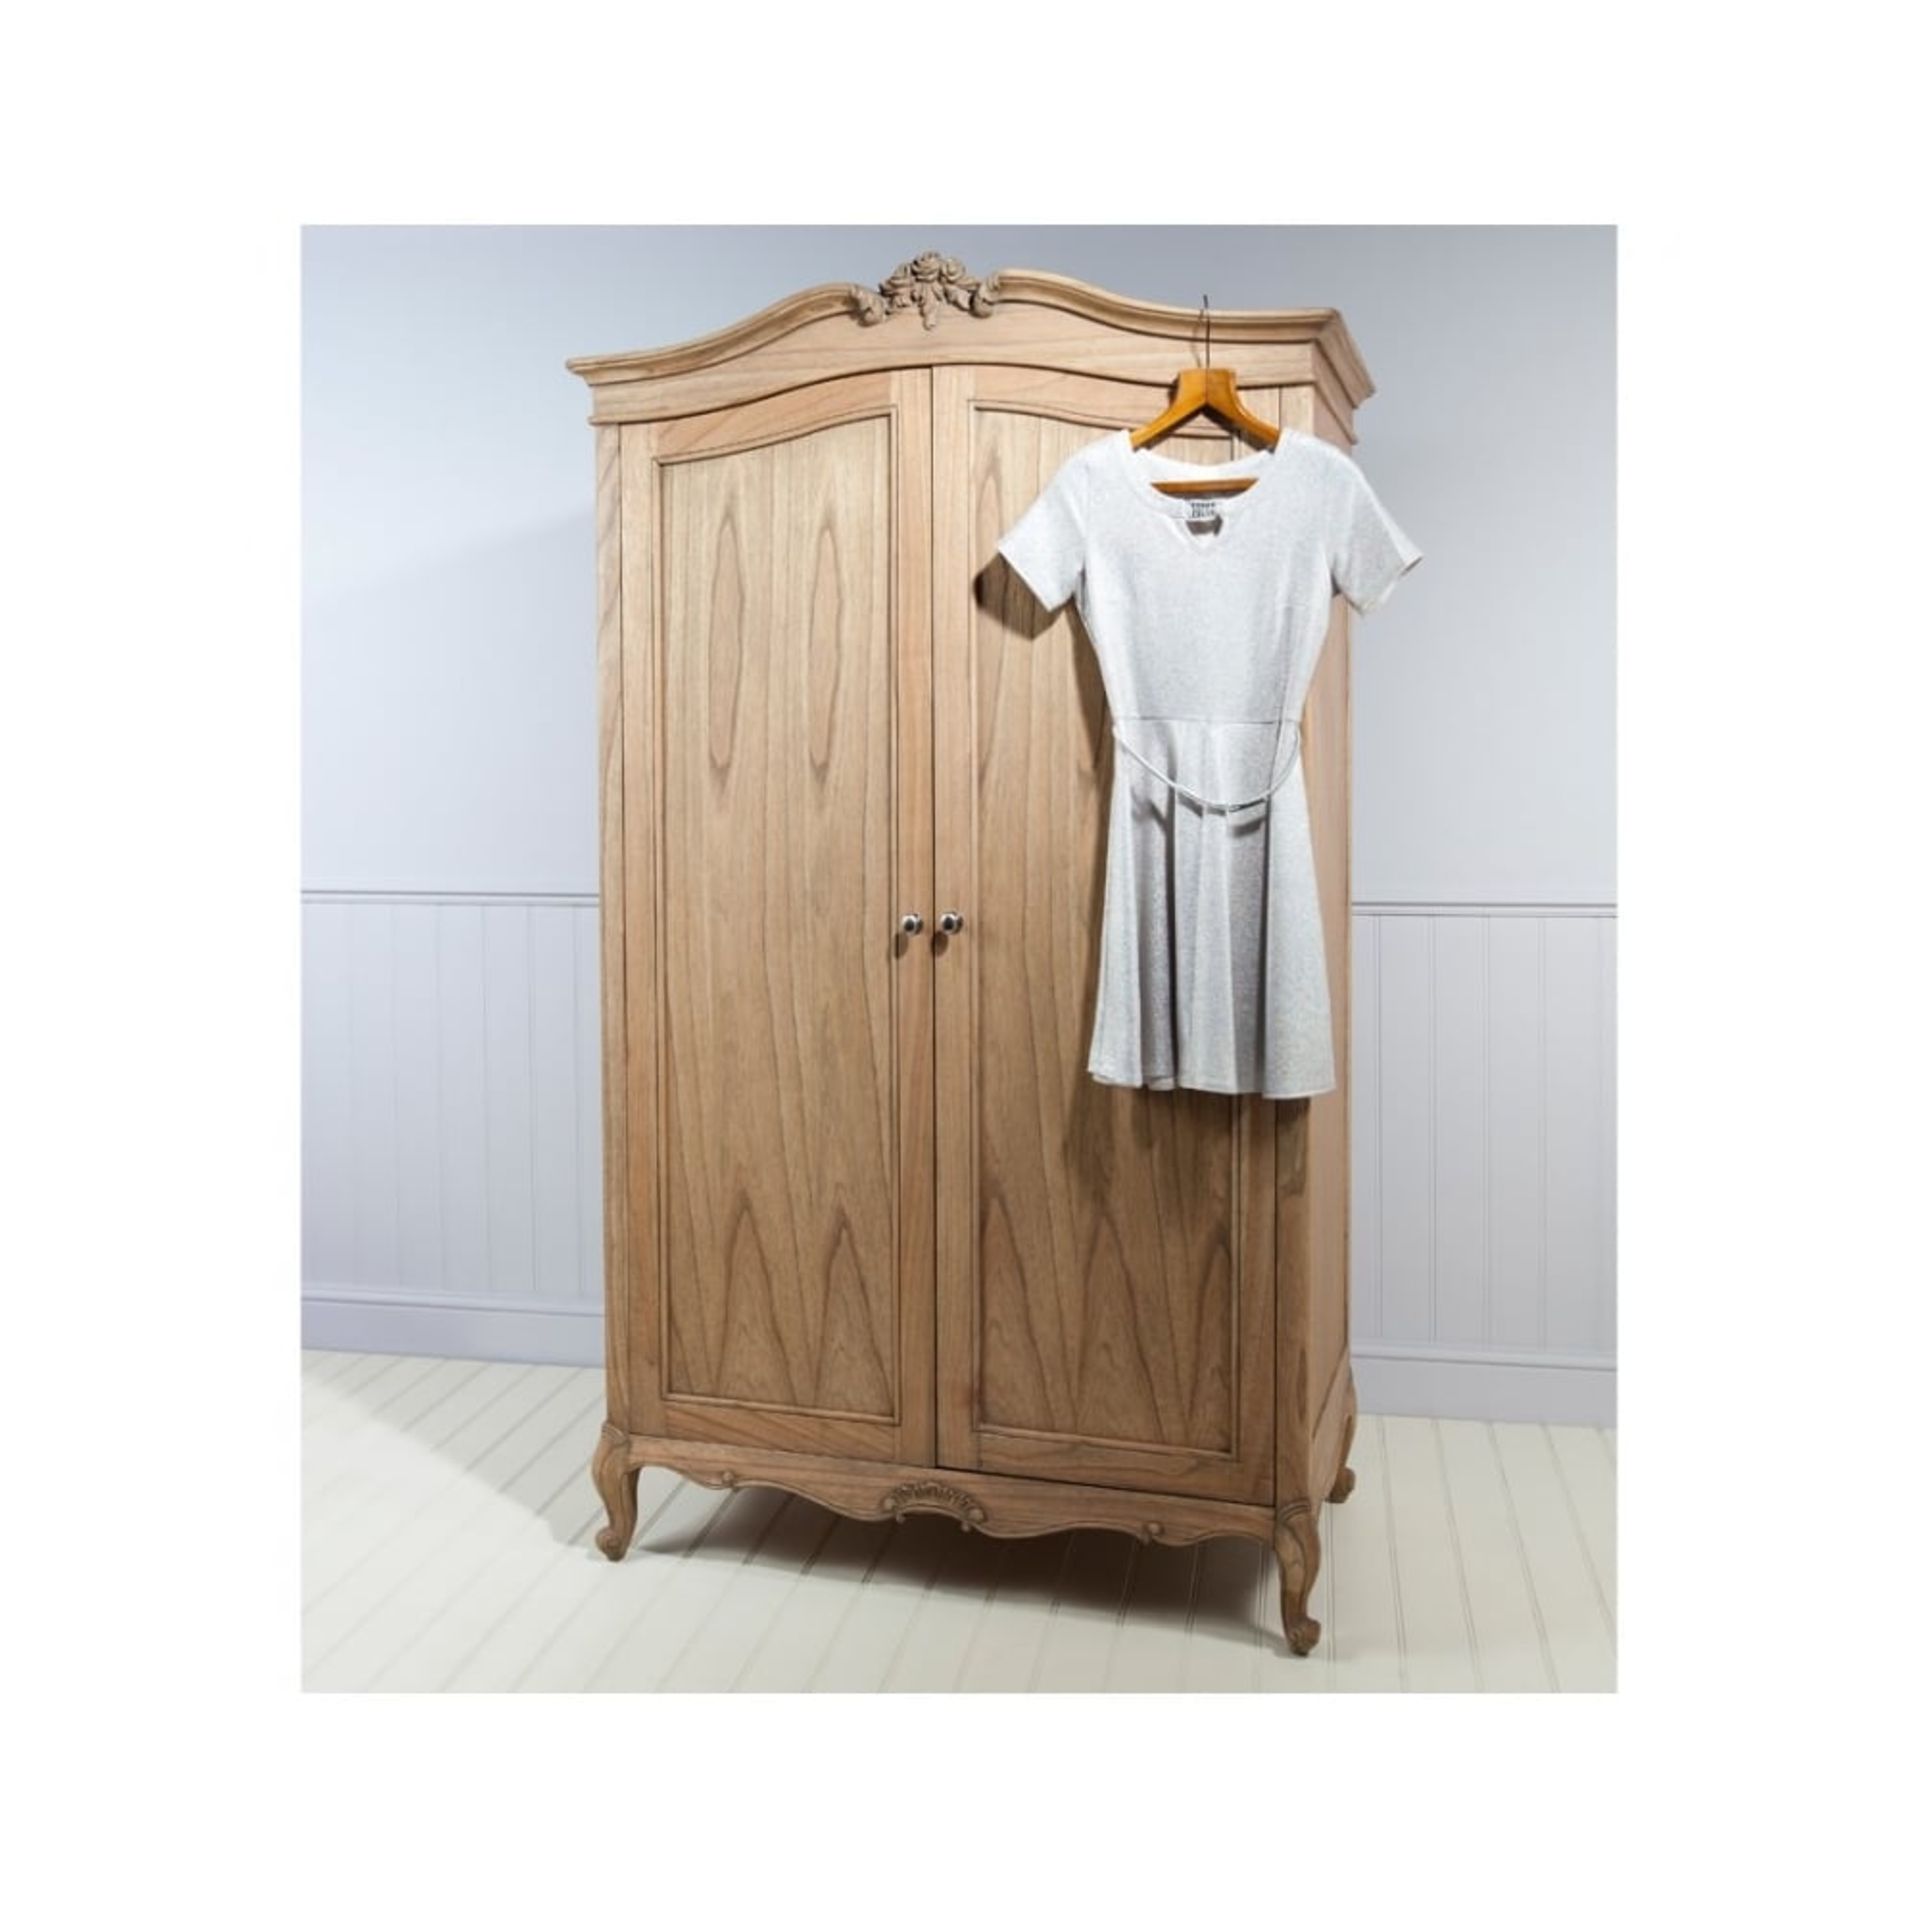 Chic 2 Door Wardrobe In Weathered Wood,Elegant And Effortlessly Chic, Add A Touch Of Glamour To Your